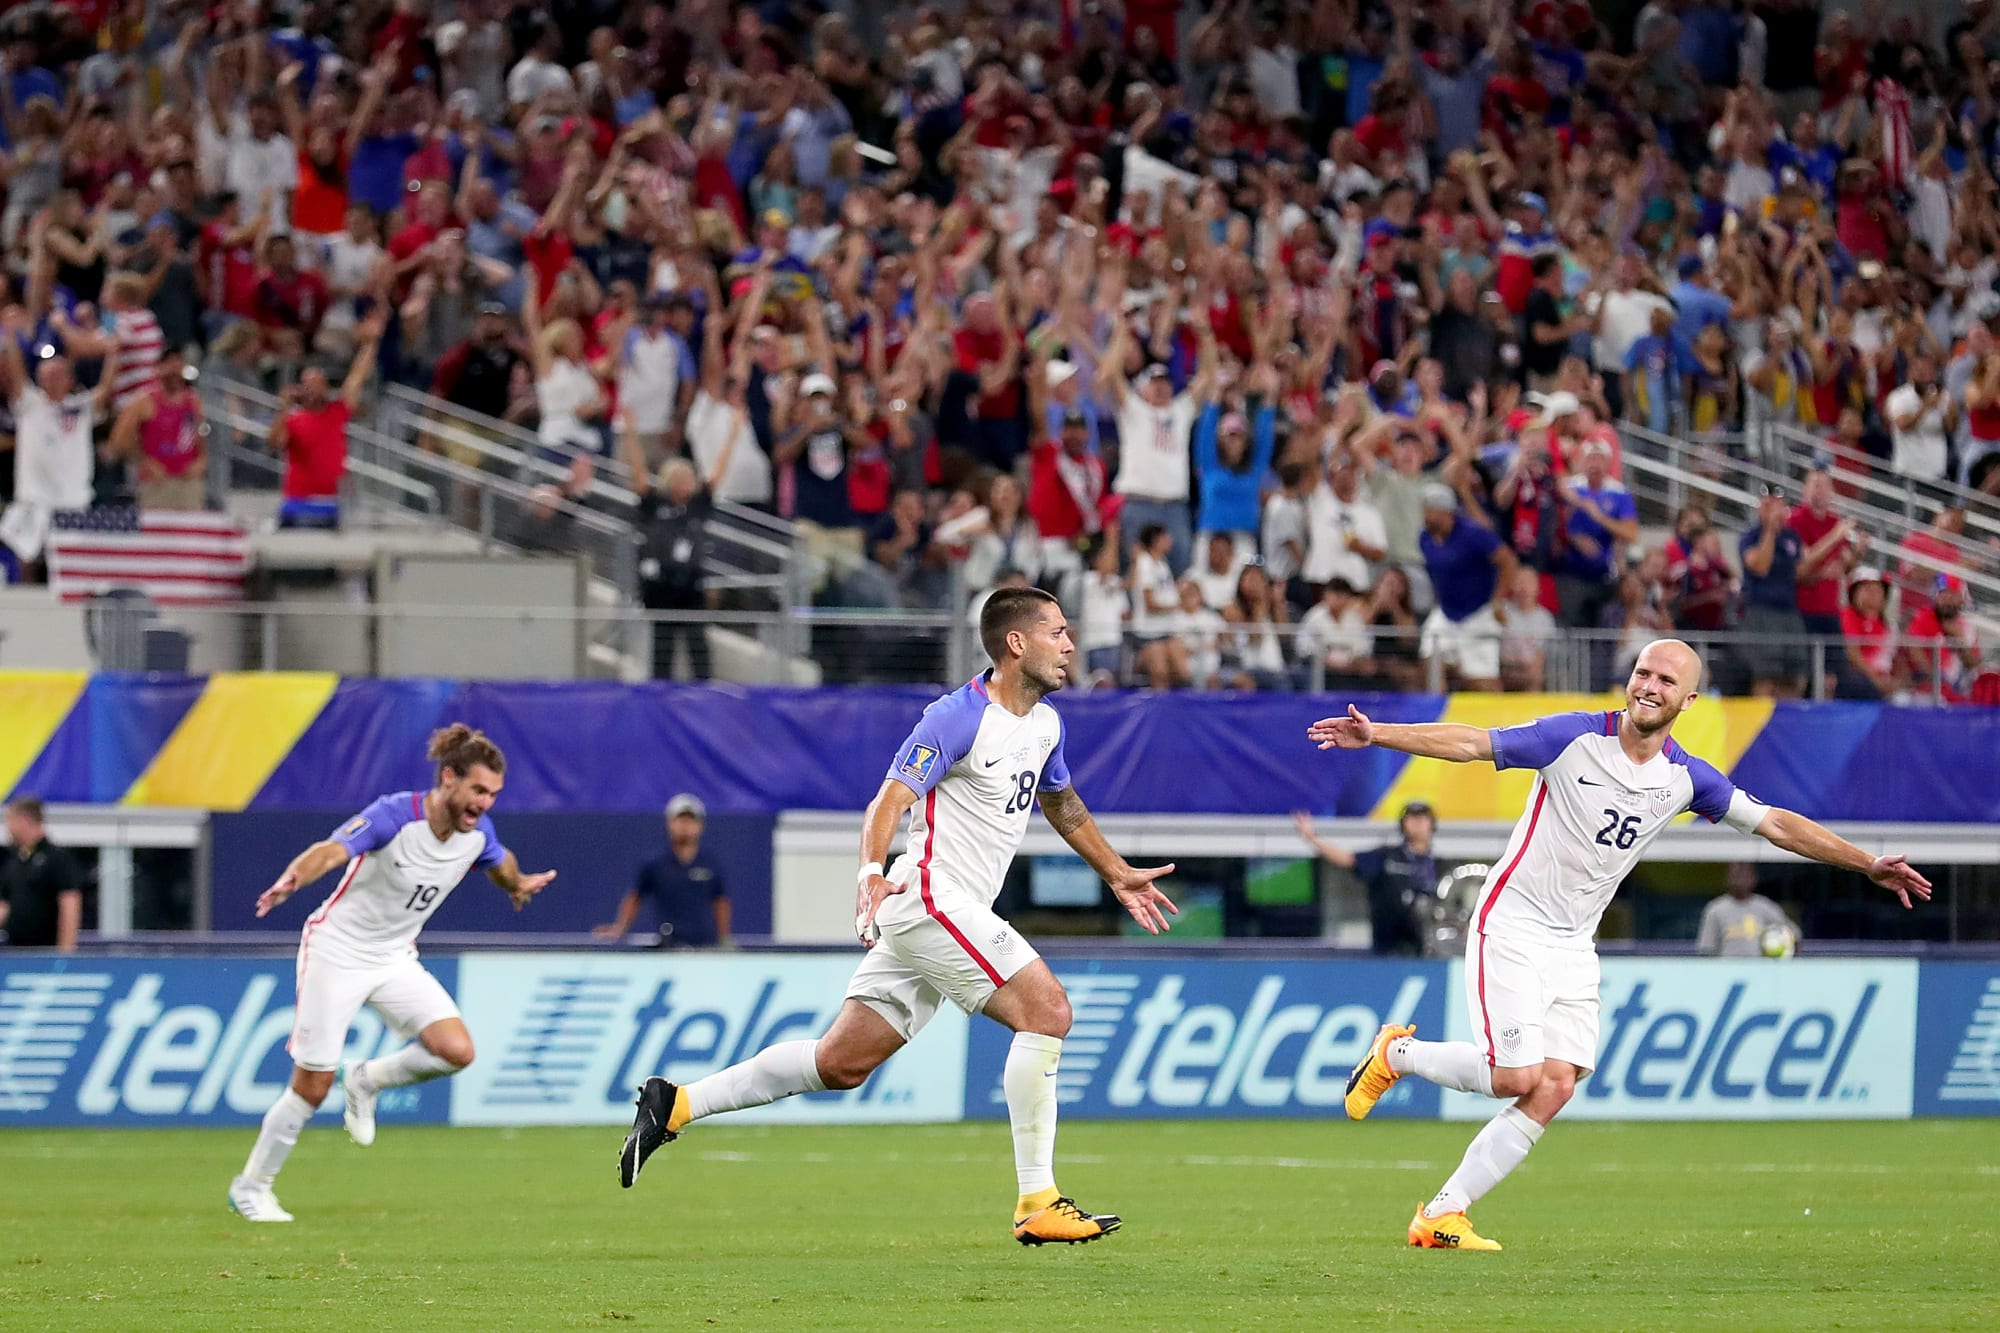 USA vs. Jamaica Gold Cup final preview